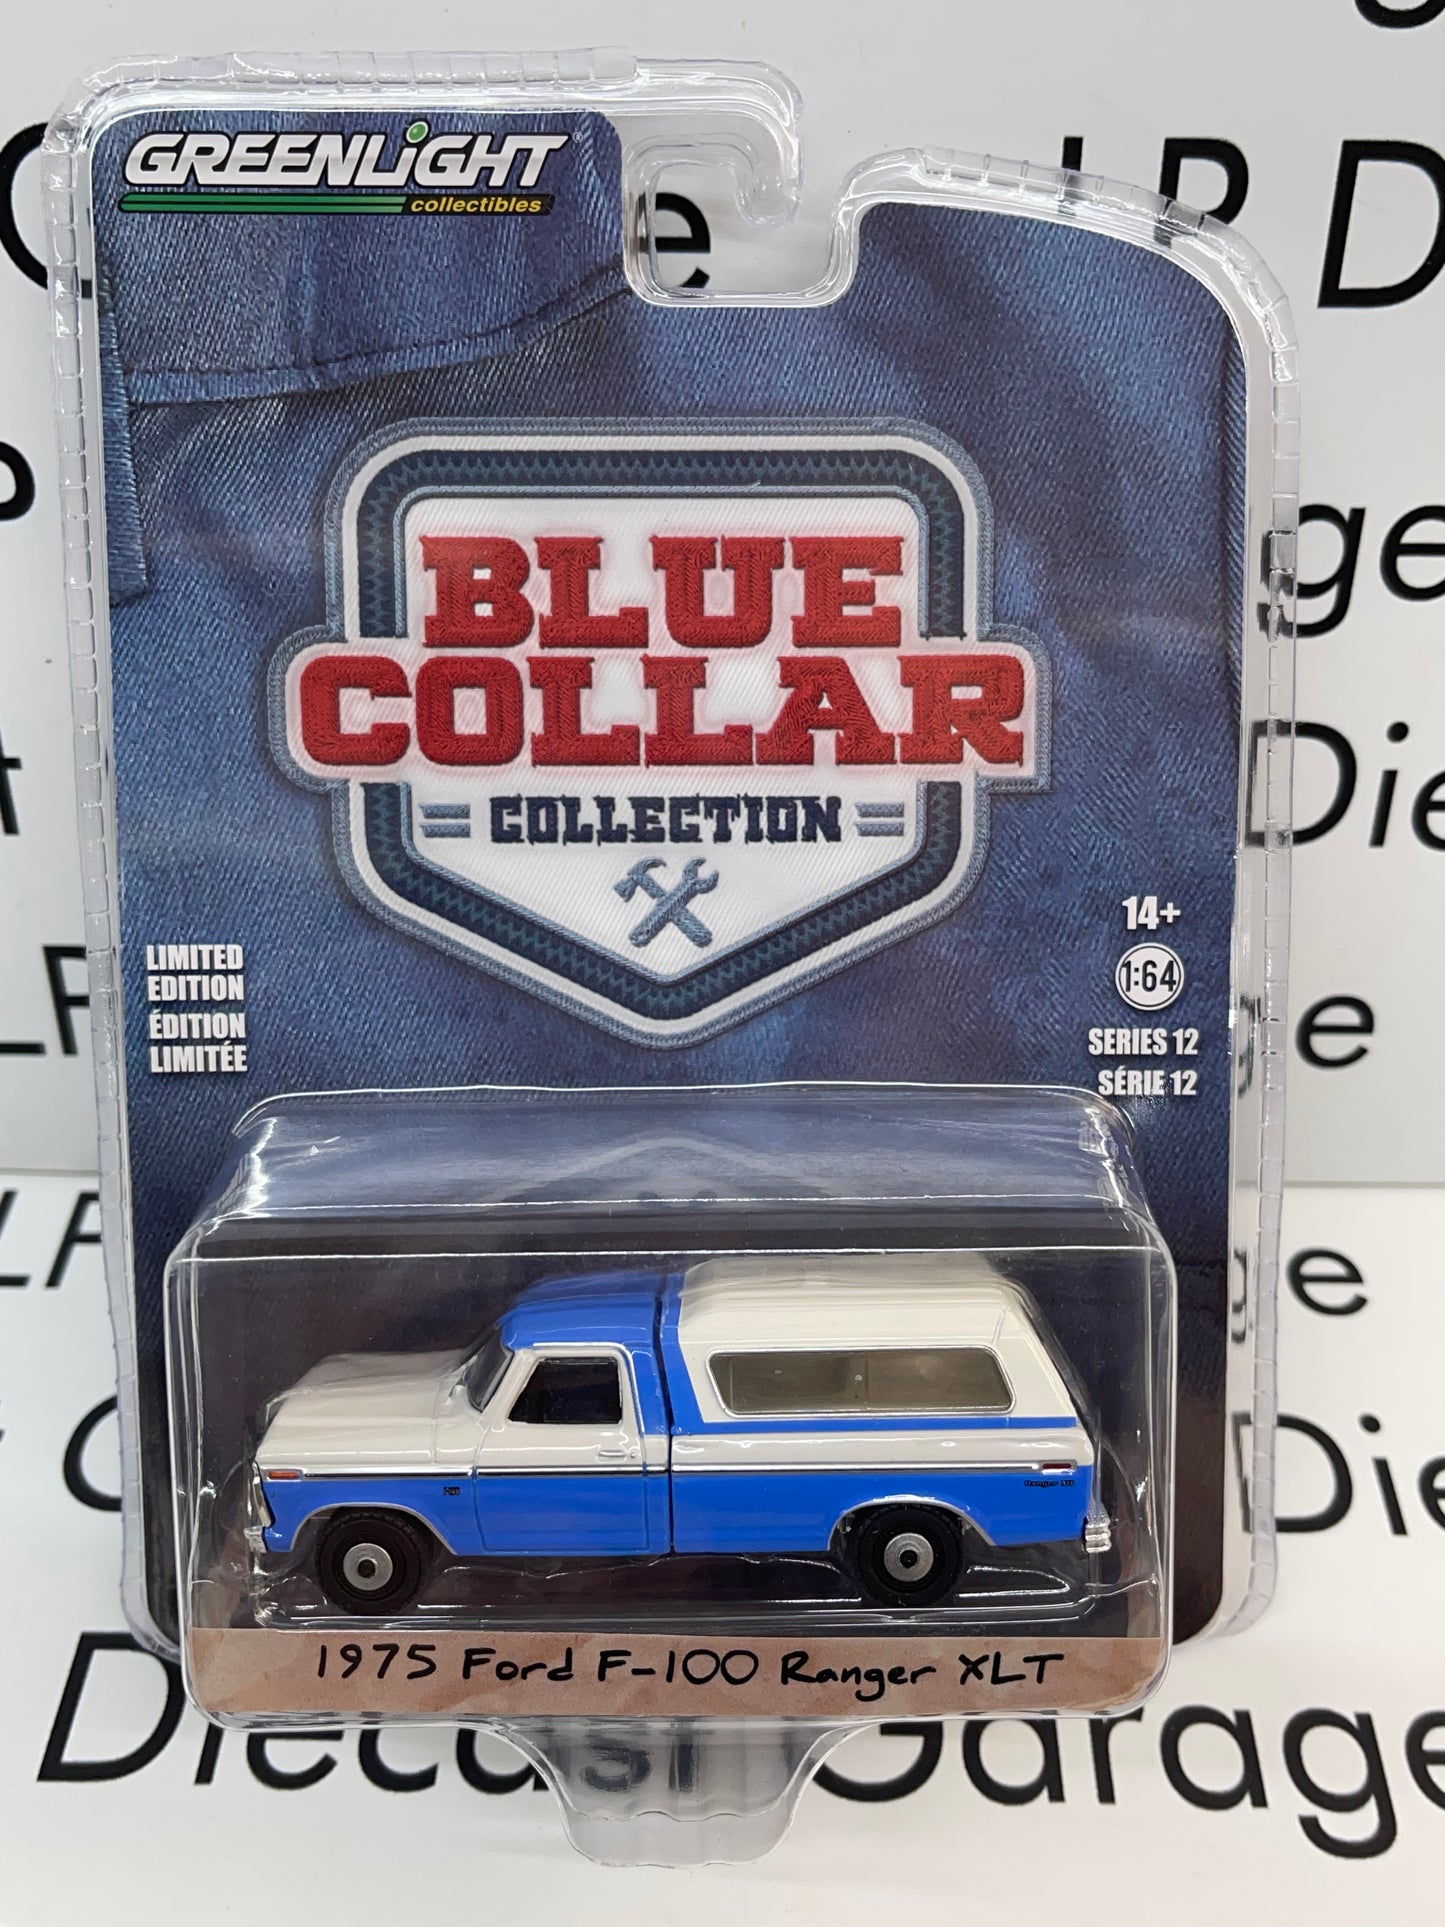 GREENLIGHT 1975 Ford F-100 Ranger XLT with Cap Wind Blue & White Blue Collar Collections 1:64 Diecast